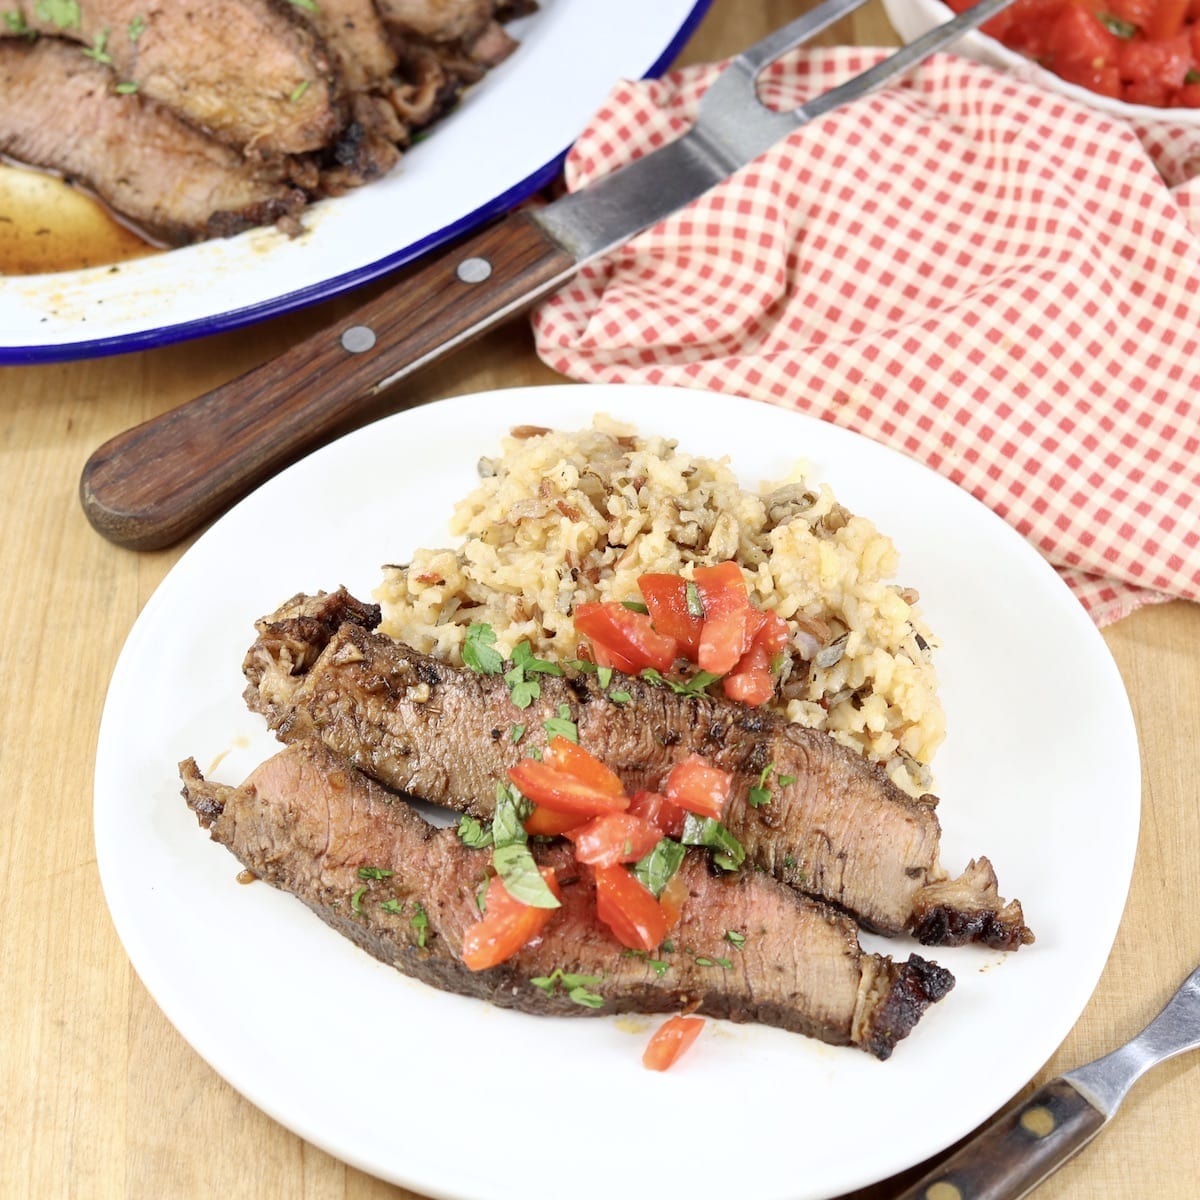 Sliced roast beef with tomato and basil garnish over rice pilaf